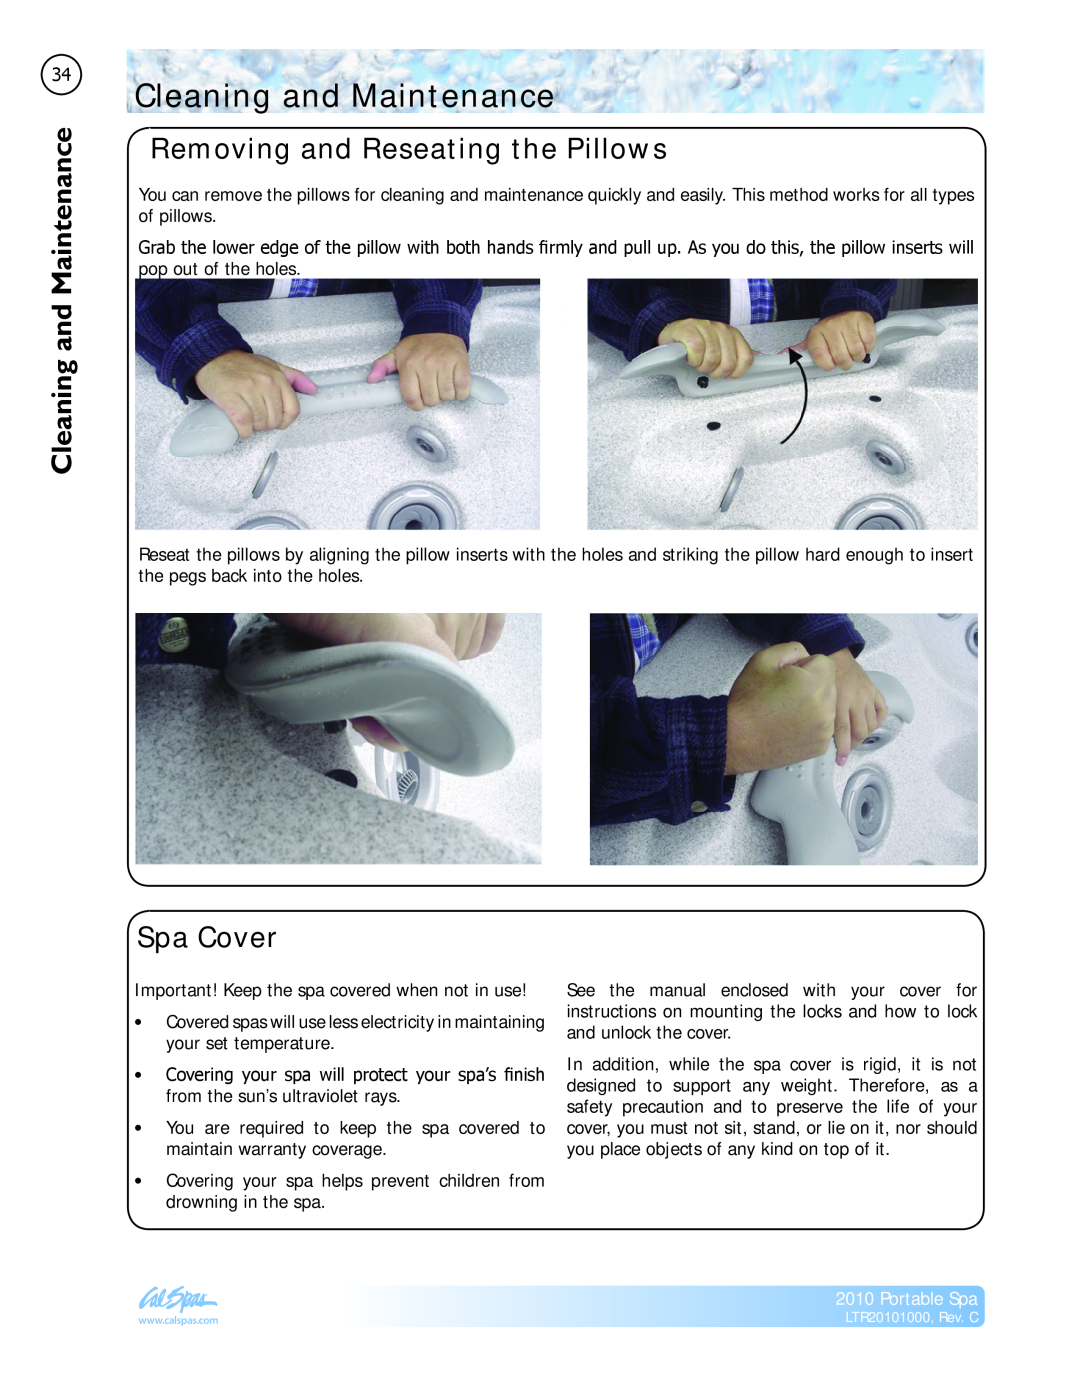 Cal Spas LTR20101000 manual Cleaning and Maintenance, Removing and Reseating the Pillows, Spa Cover, Portable Spa 